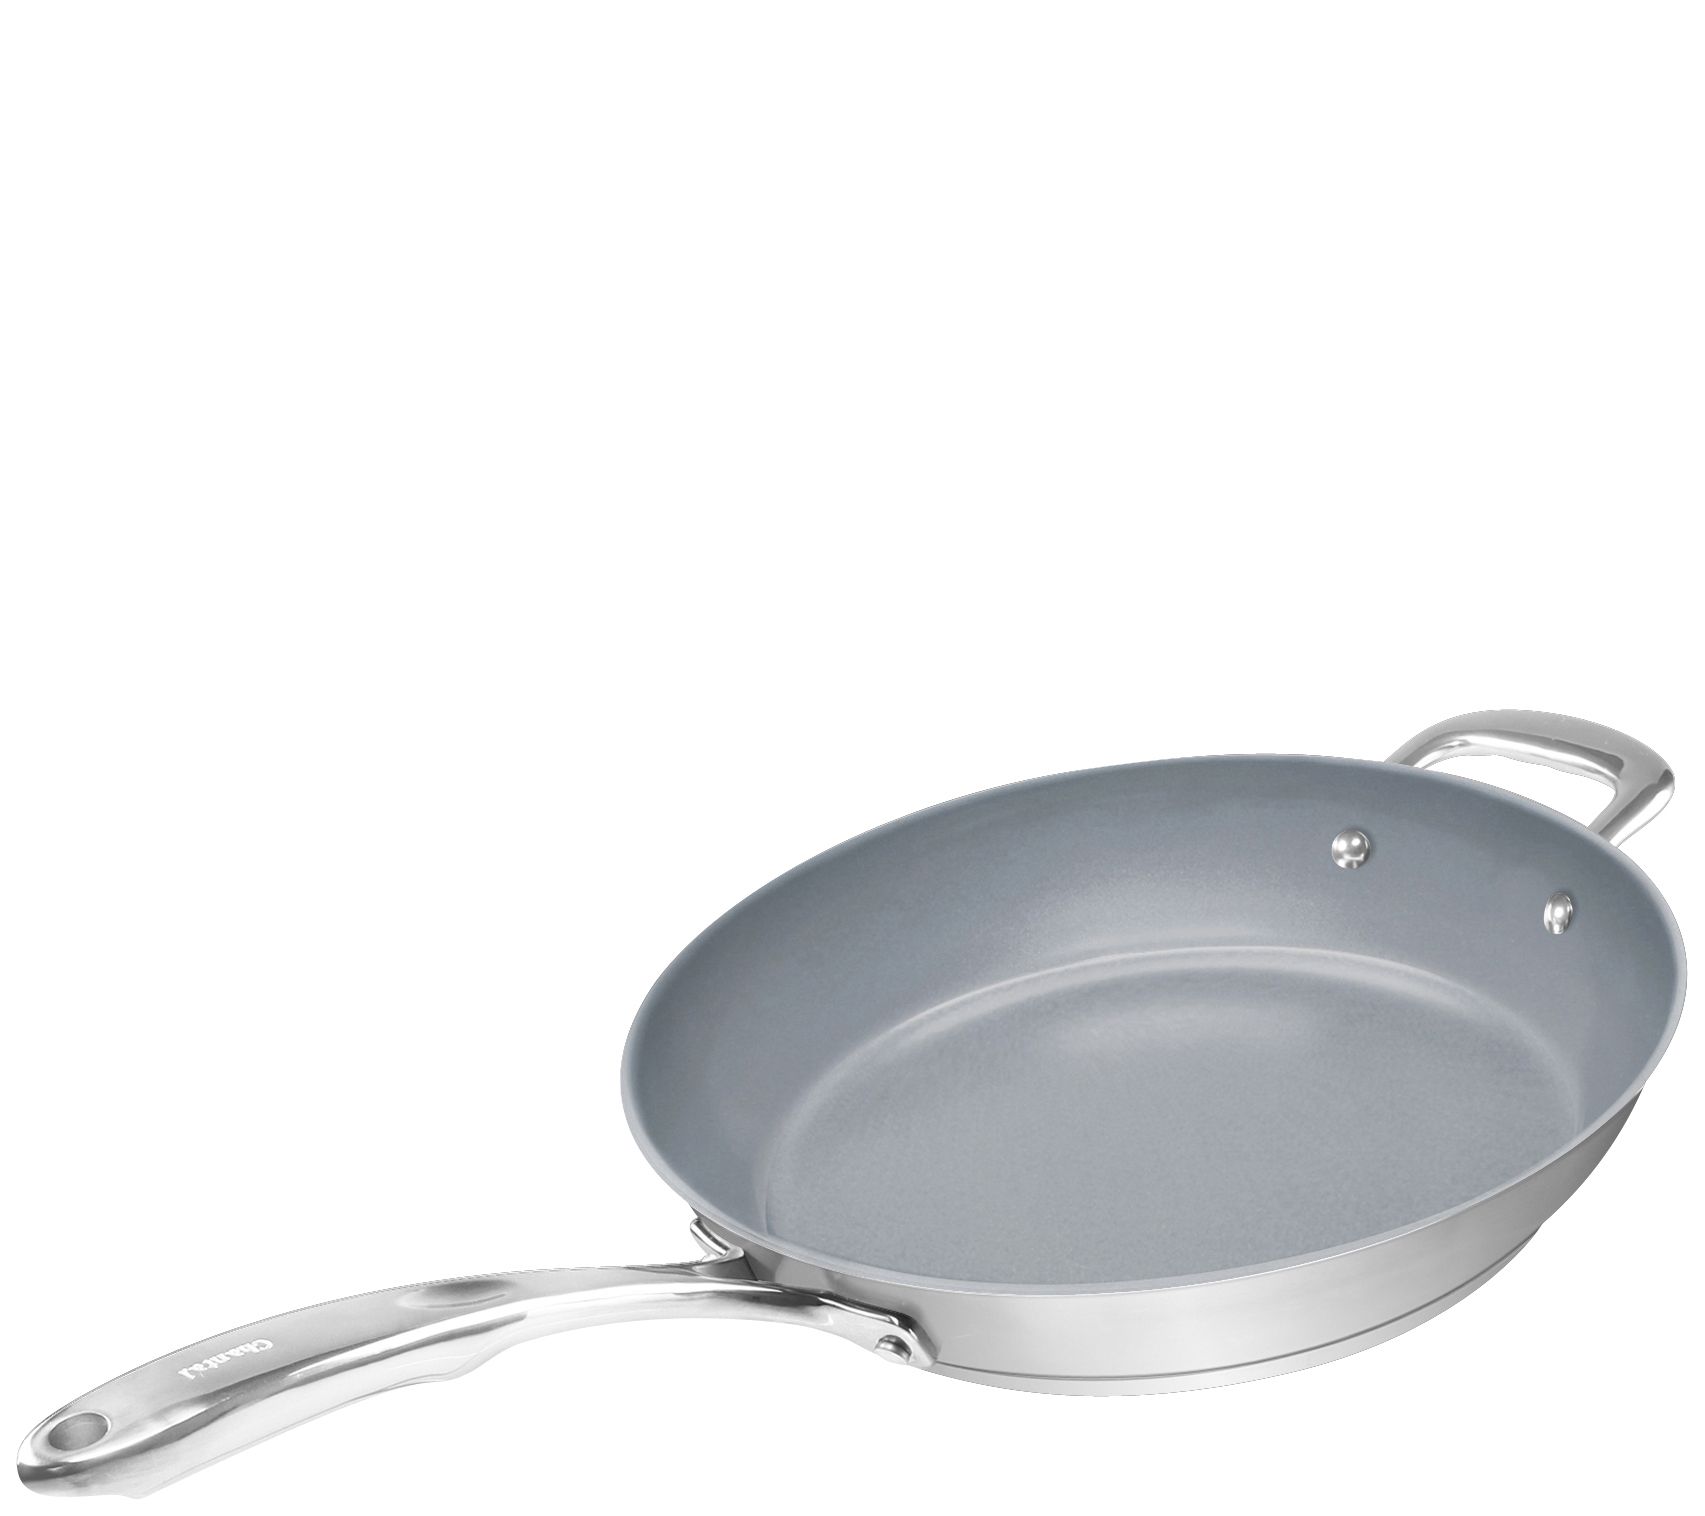 Chantal 1 quart Induction 21 Steel Sauce Pan with Lid